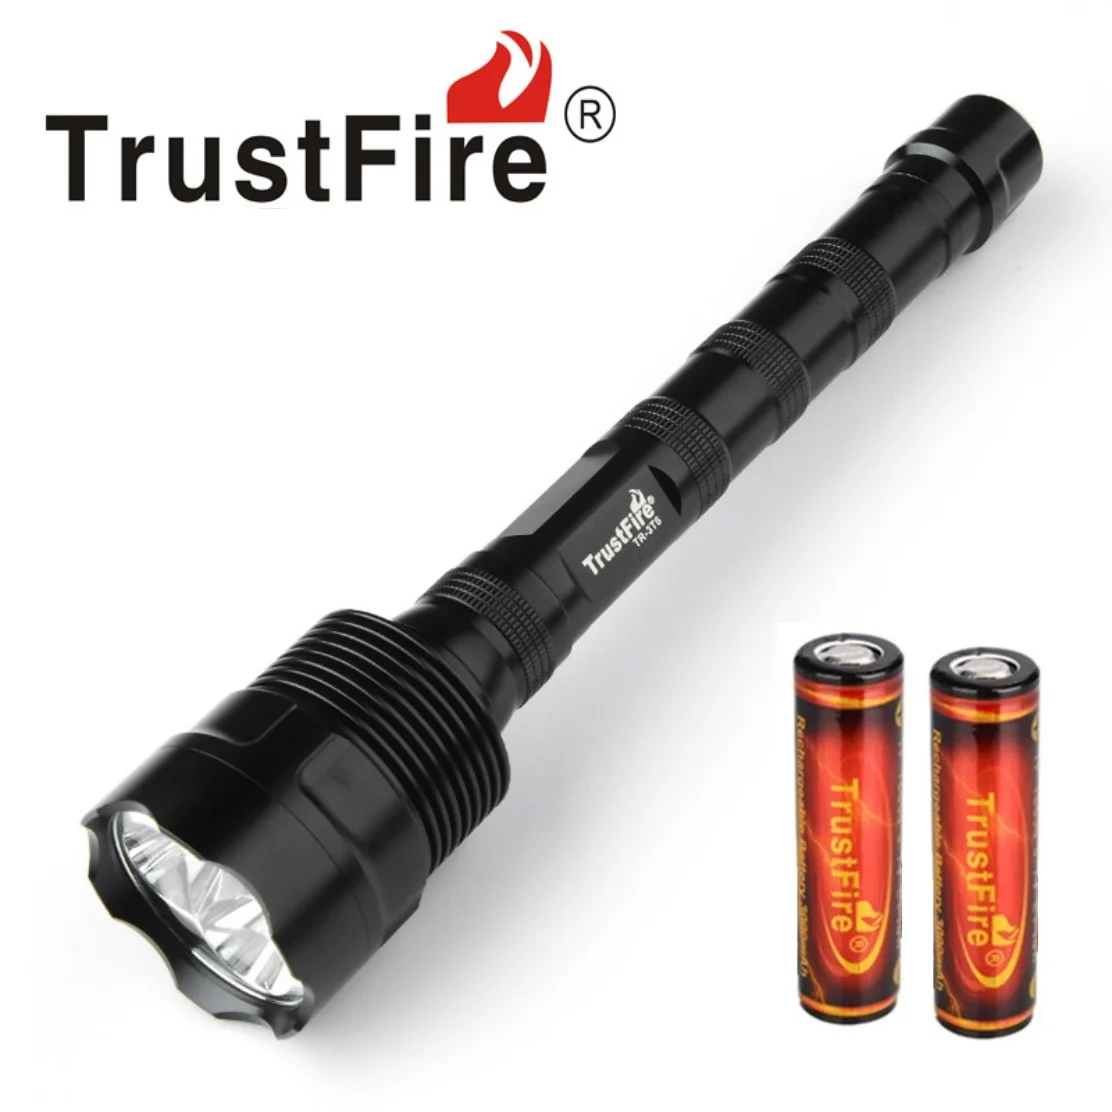 

TrustFire TR-3T6 Powerful Torch Light Cree XM L T6 3800LM LED Flashlight by 18650 Battery for Camping,Hiking,Self-defense